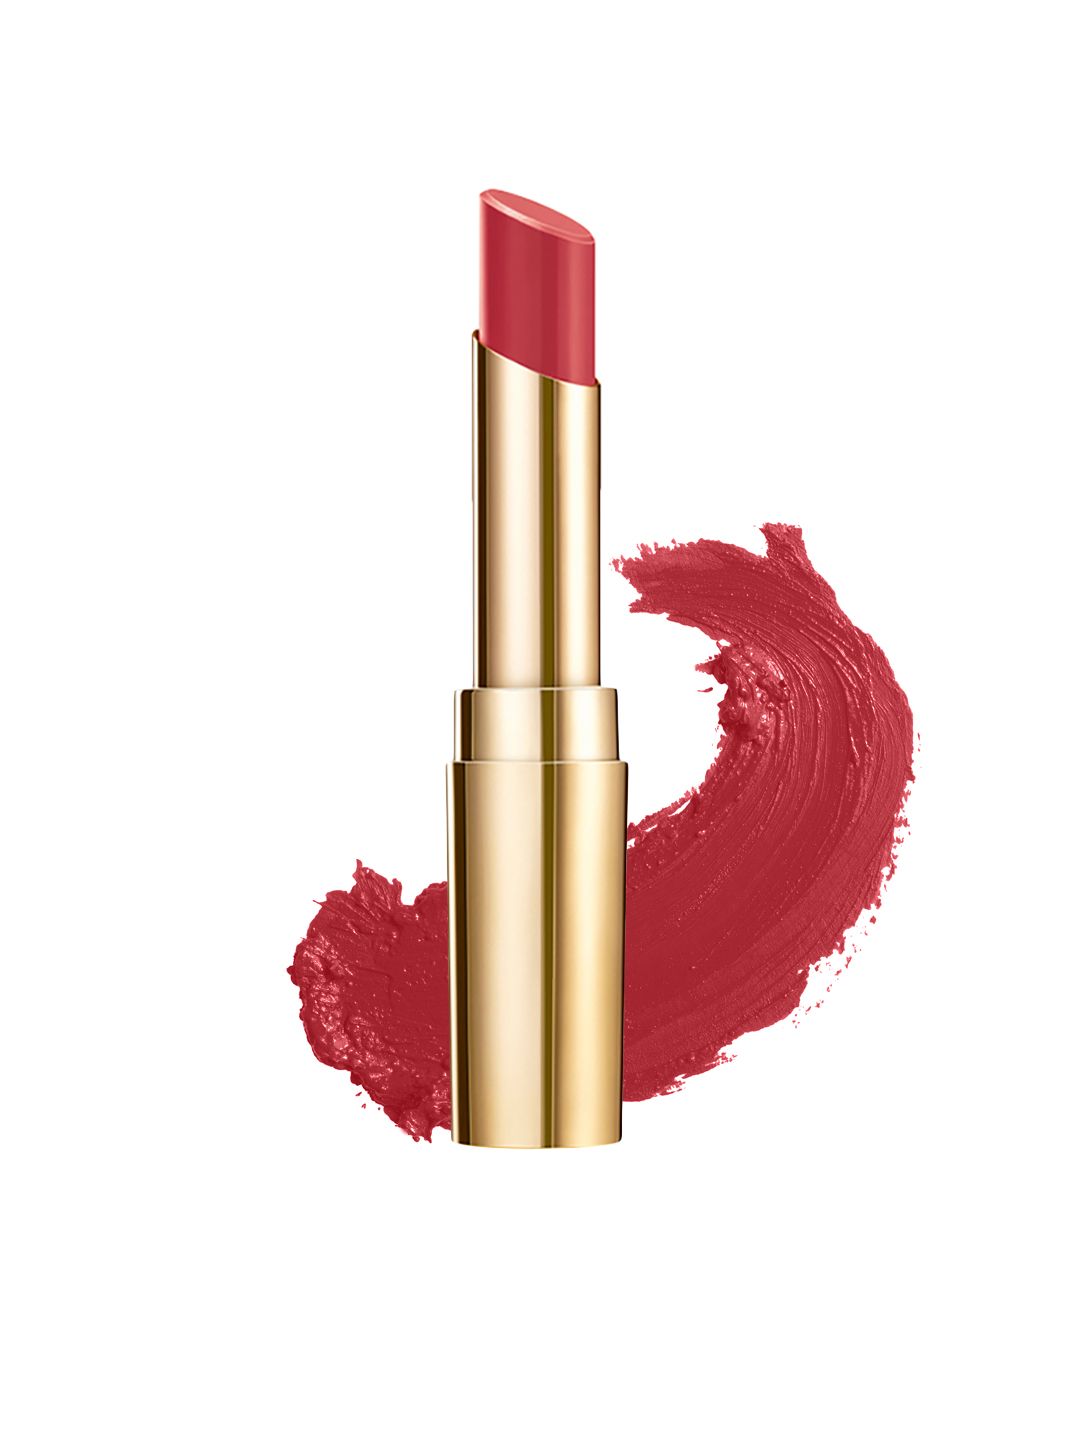 Lakme Absolute Matte Ultimate Lip Color - Royal Rust 3.4gm Price in India